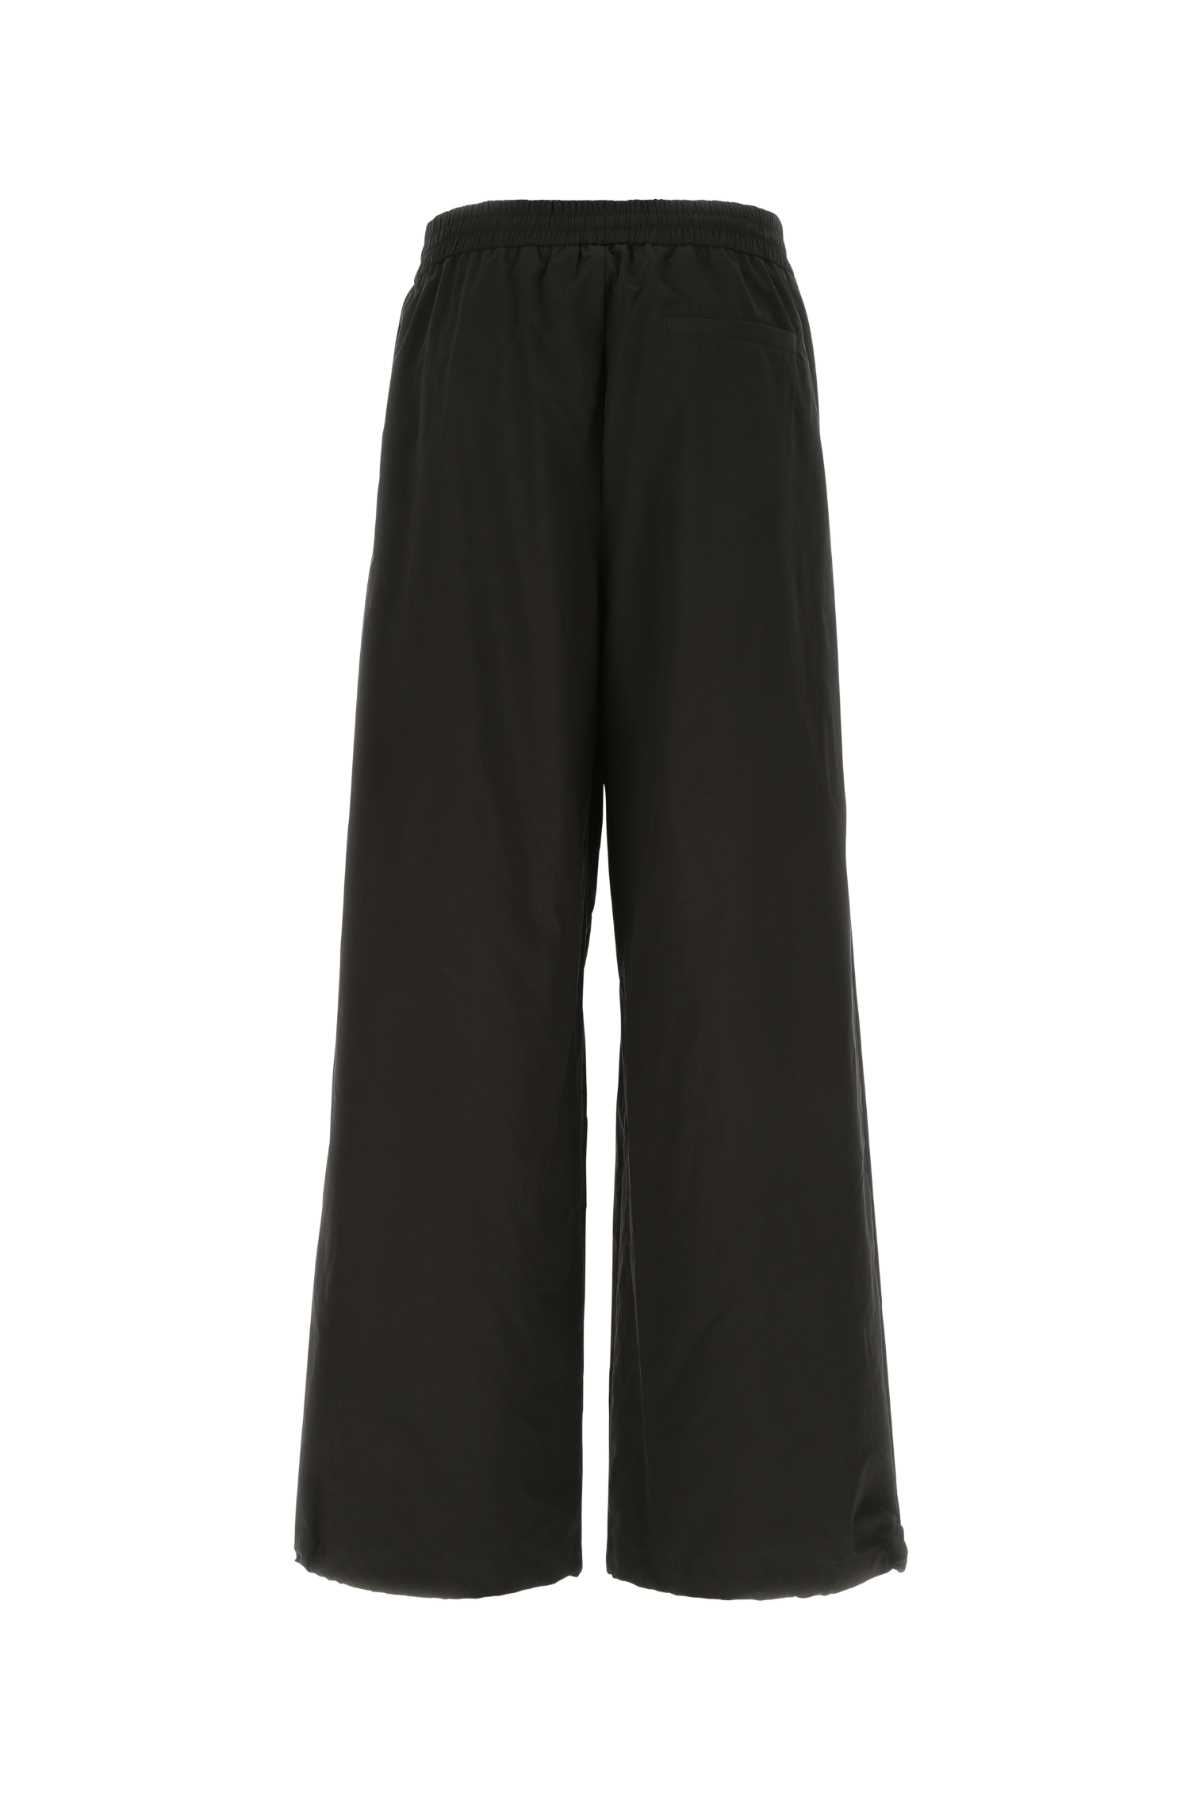 Off-white Black Polyester Blend Pant In 1000